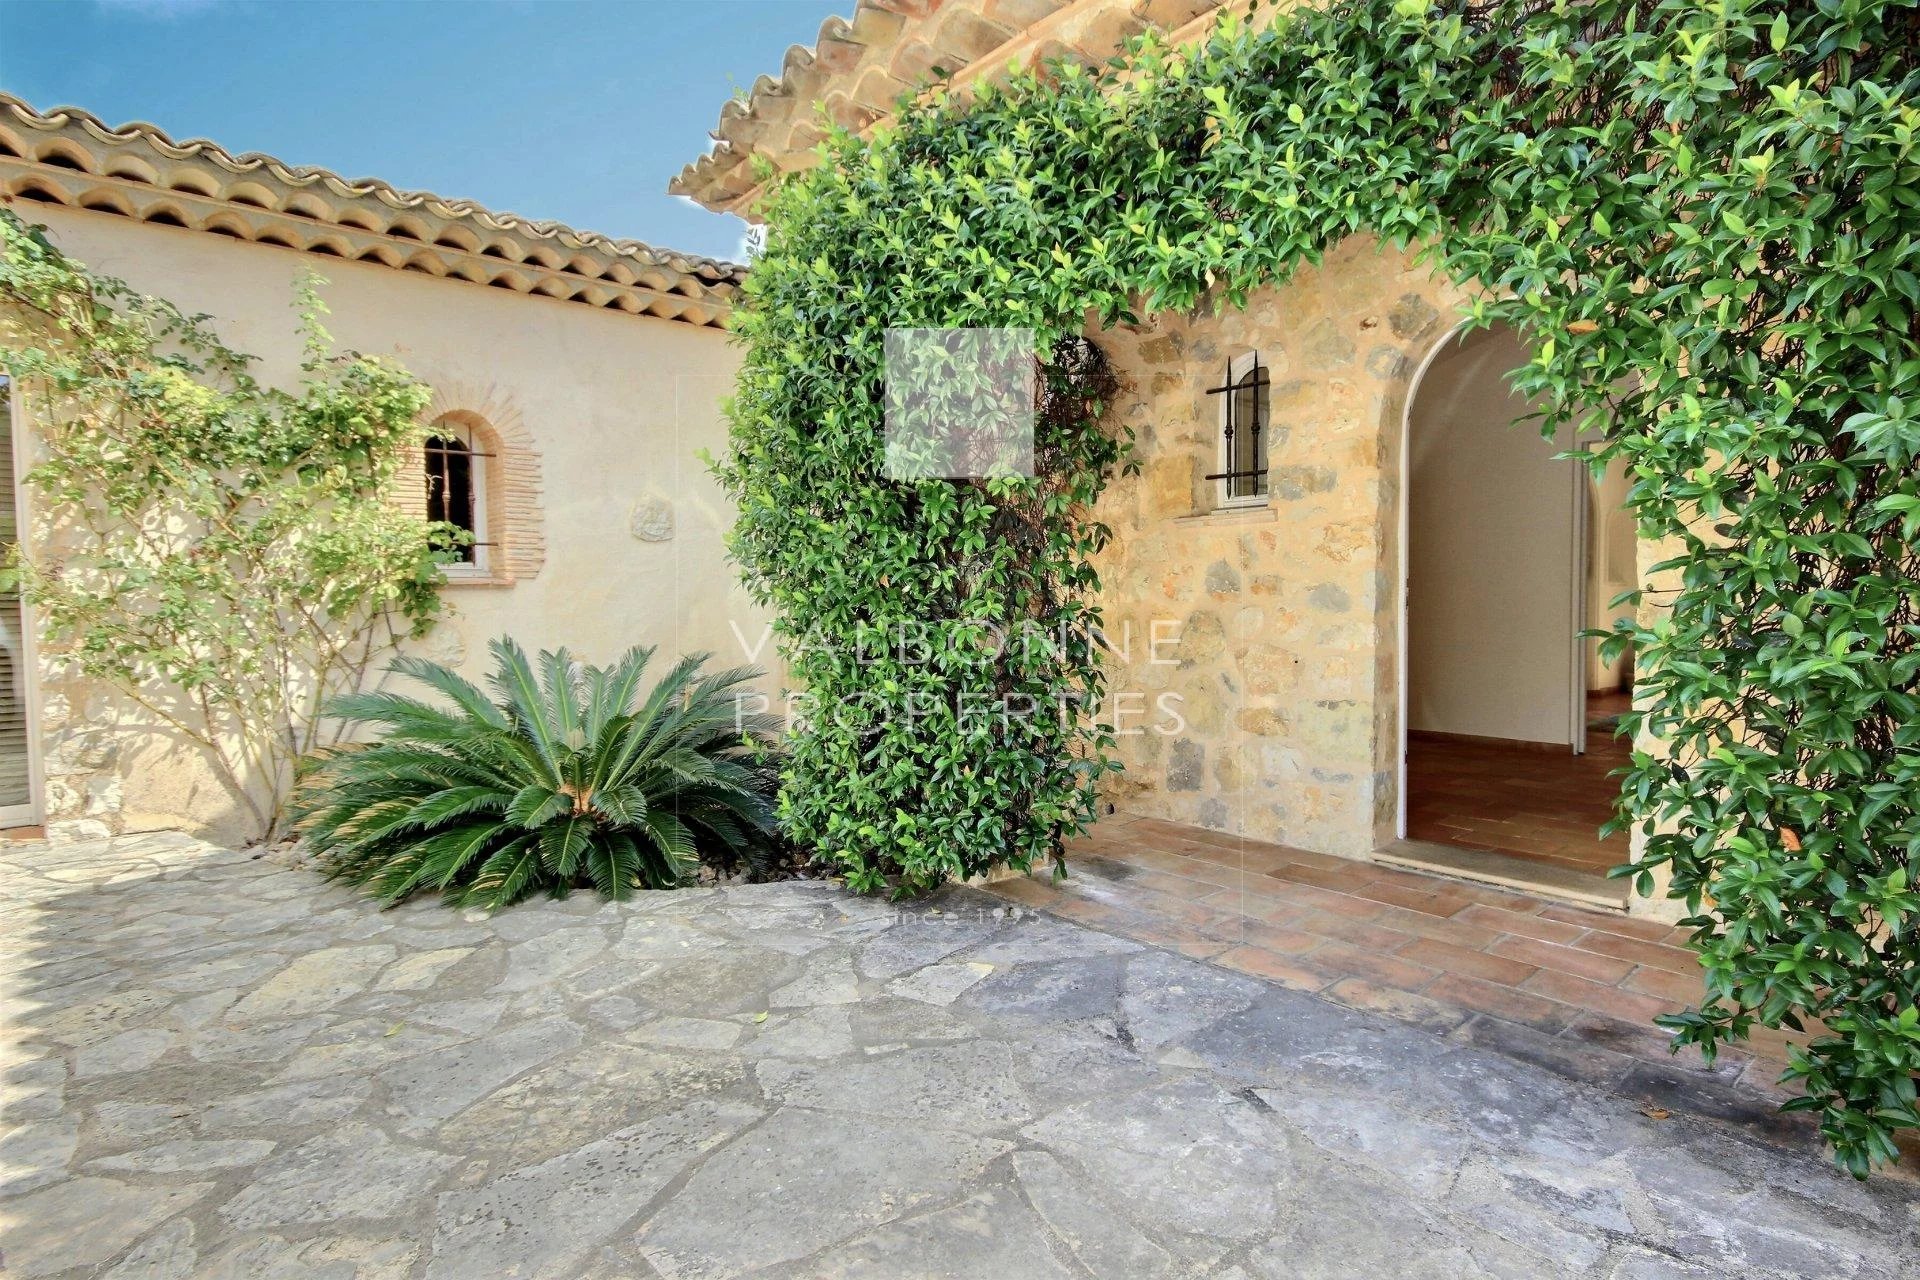 Stone house within walking distance of the village of Valbonne